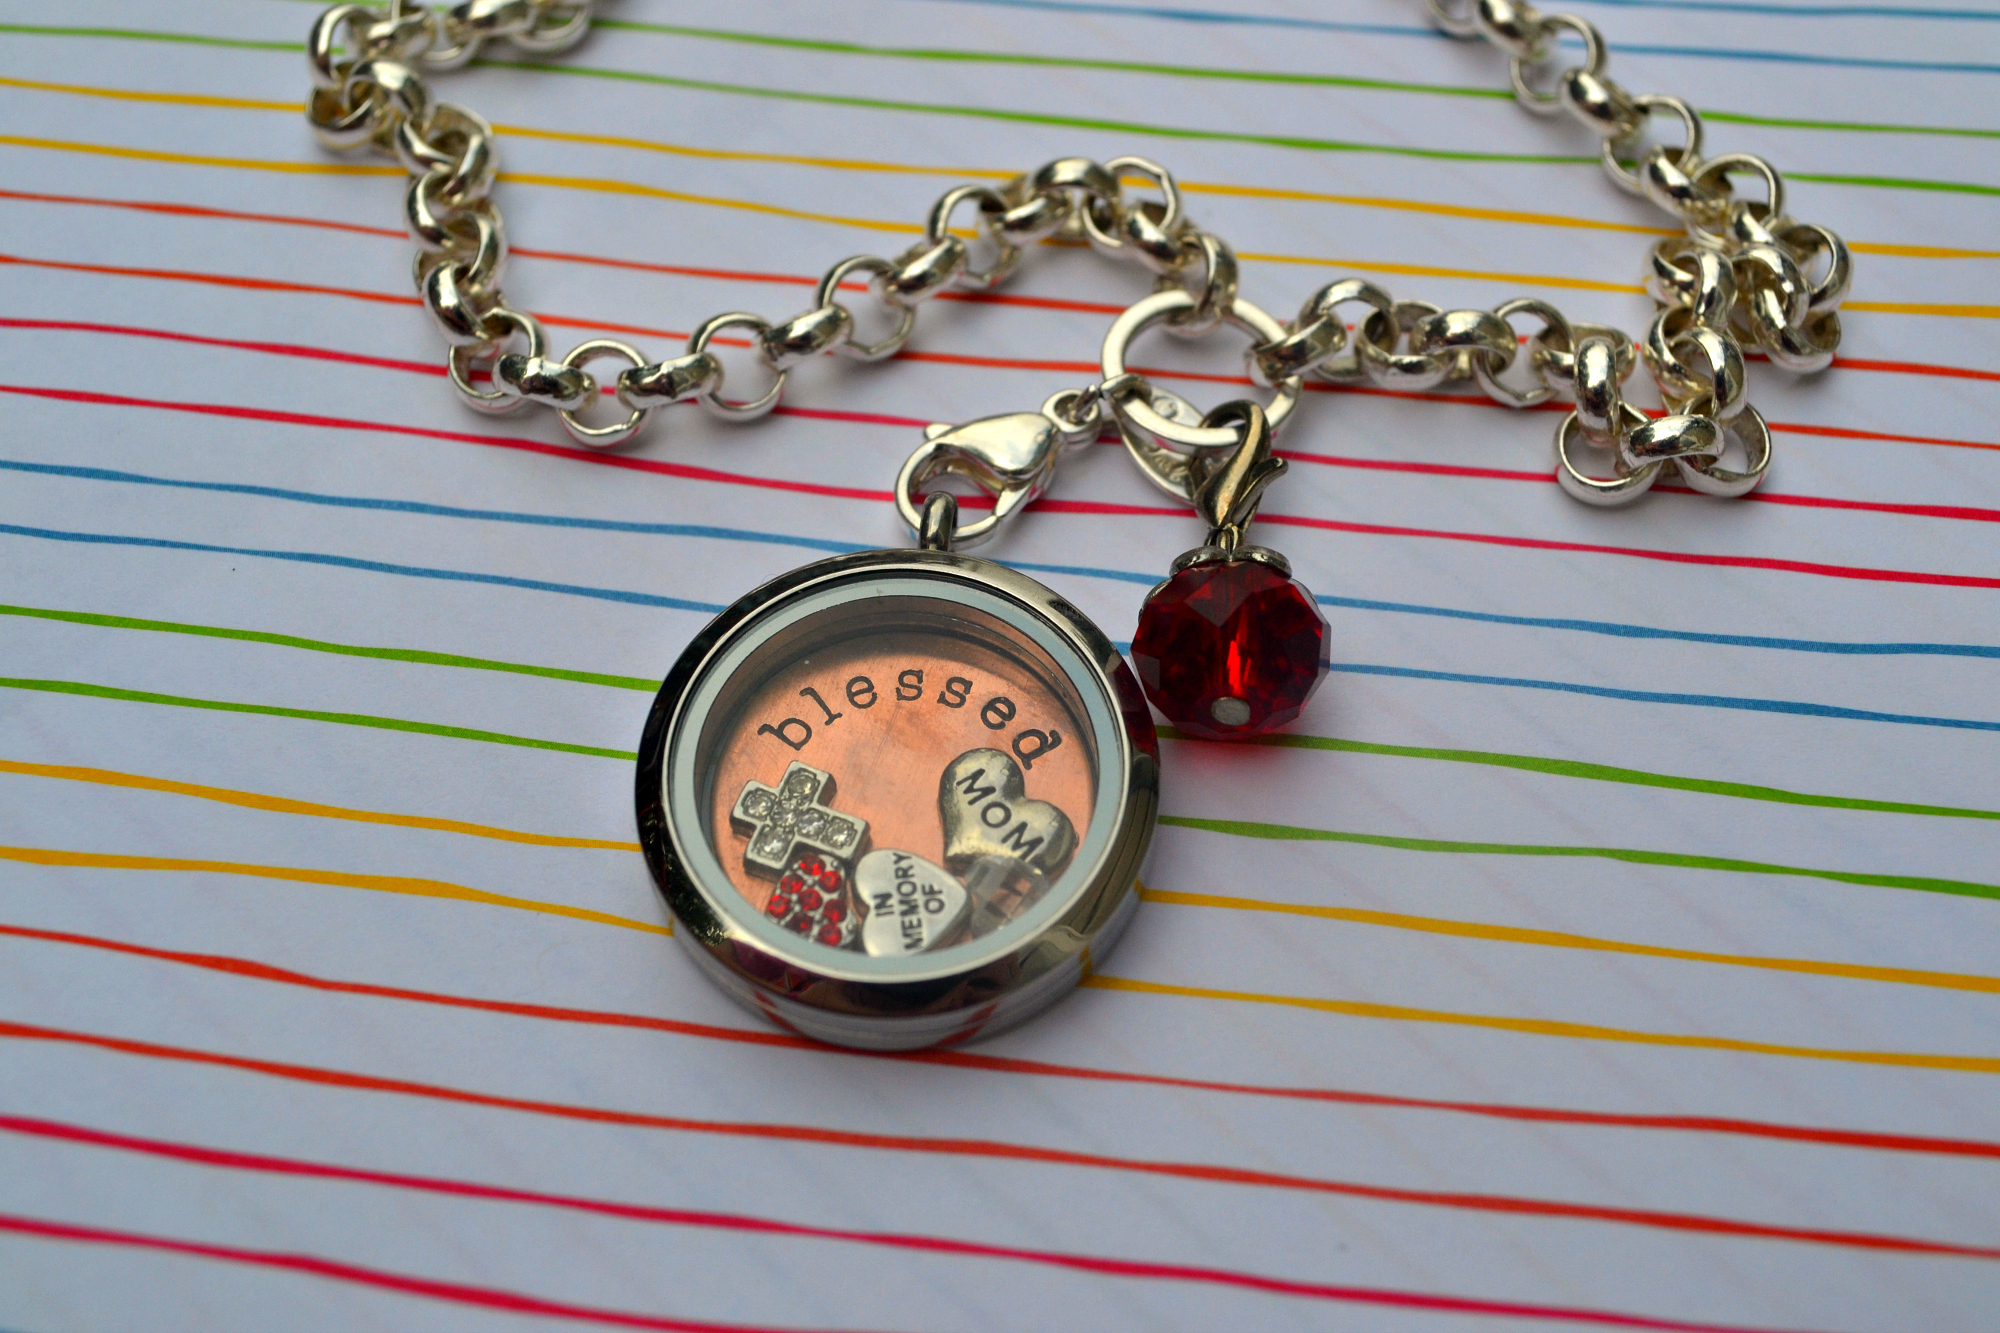 Origami Owl Jewelry Reviews Origami Owl Necklace In Honor Of My Mom Plus A Giveaway